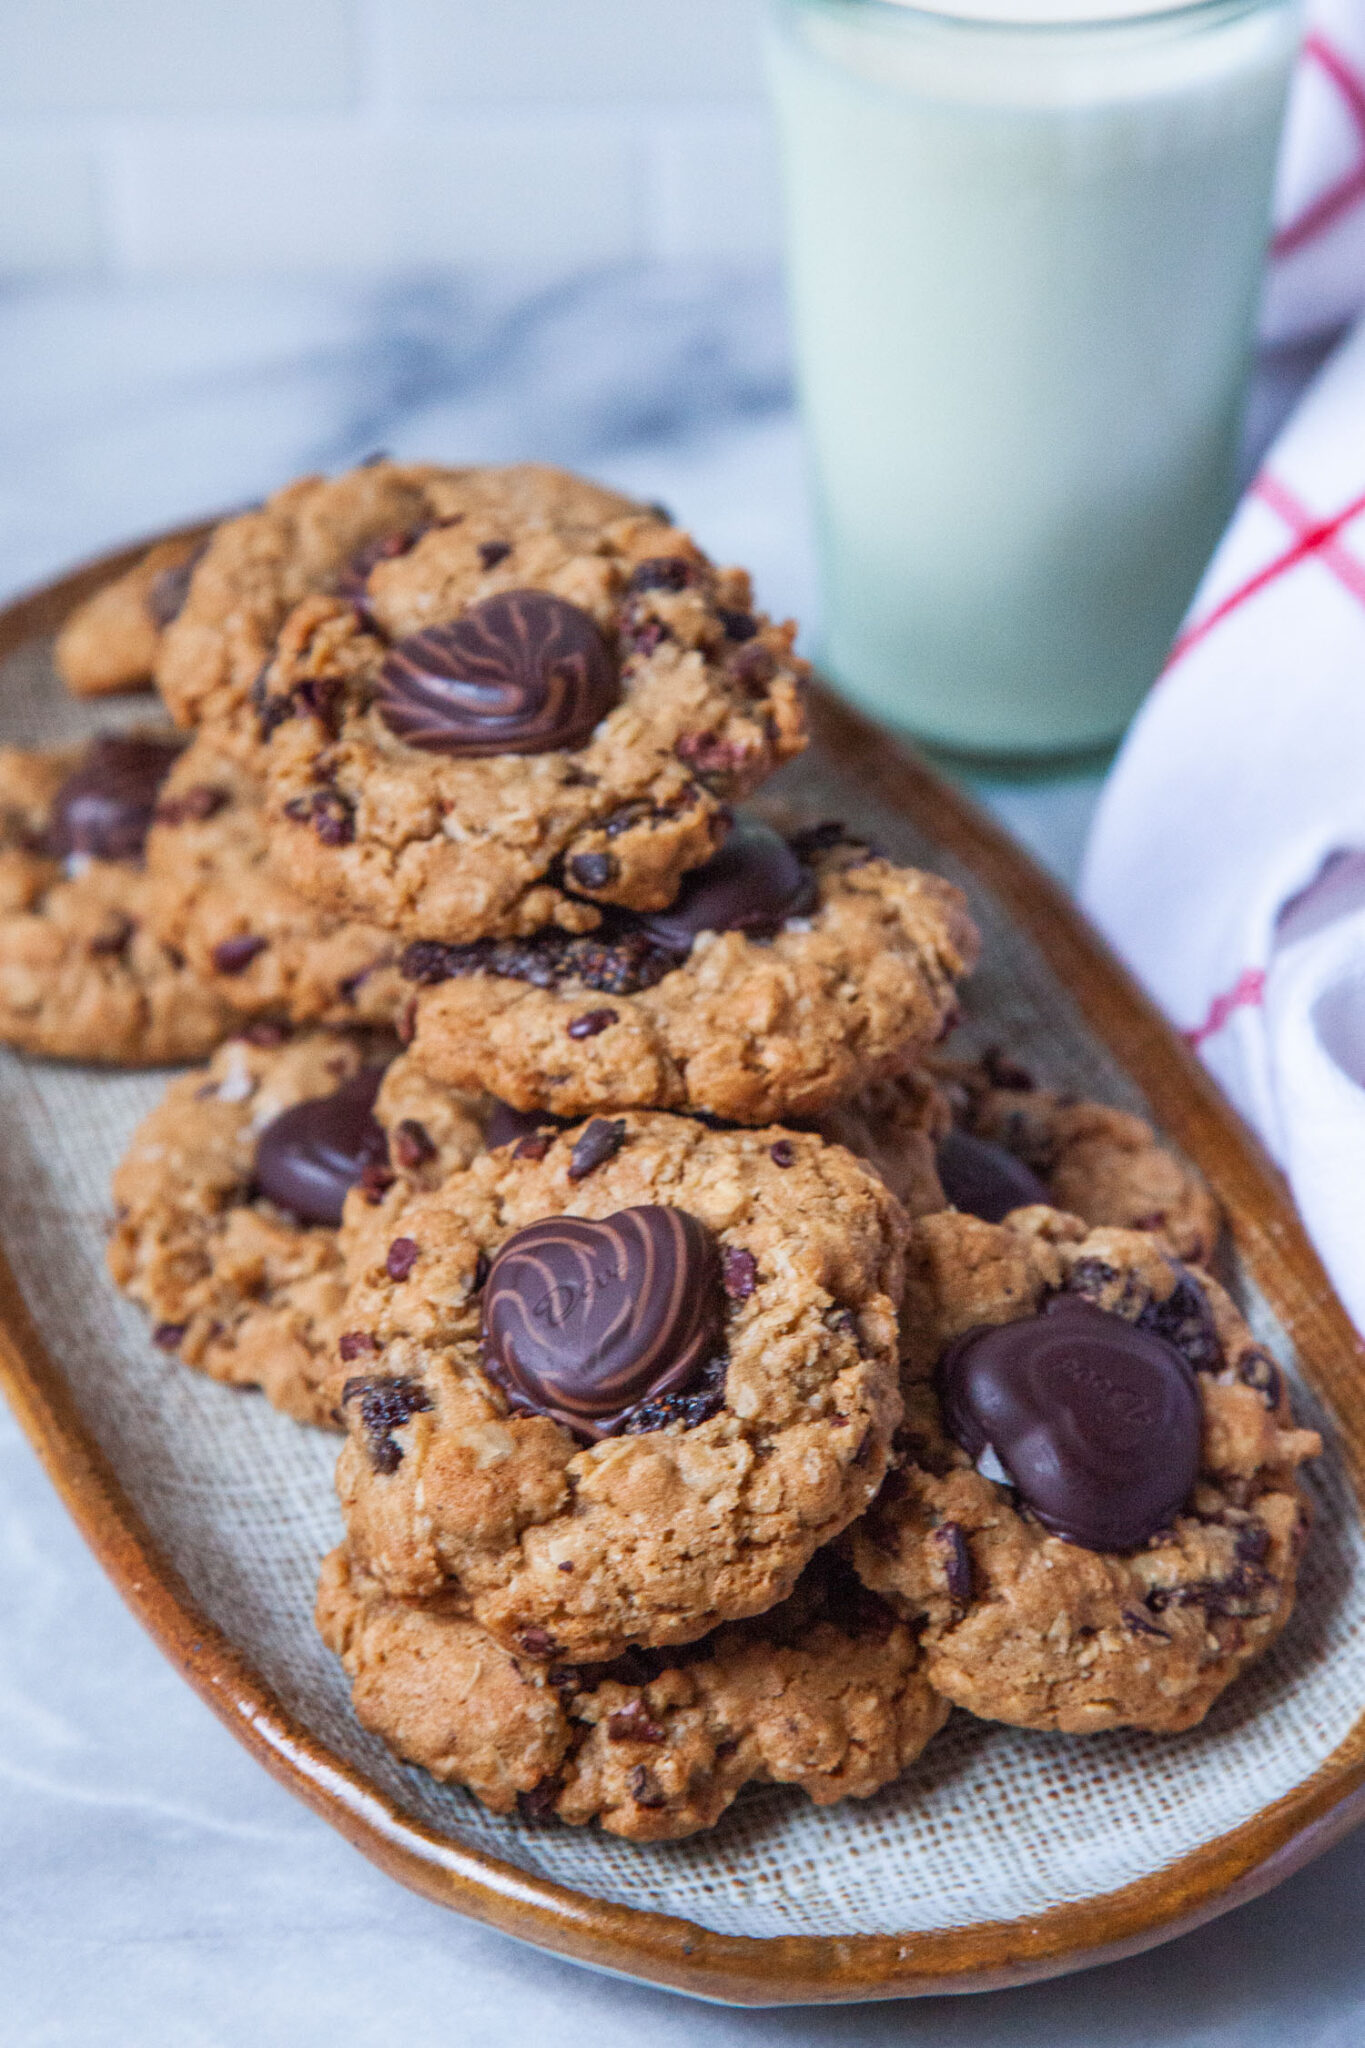 A long oval plate filled with oatmeal dried strawberry cookies with a chocolate heart in the center of each cookie. There is a glass of milk and a cloth napkin behind the plate.